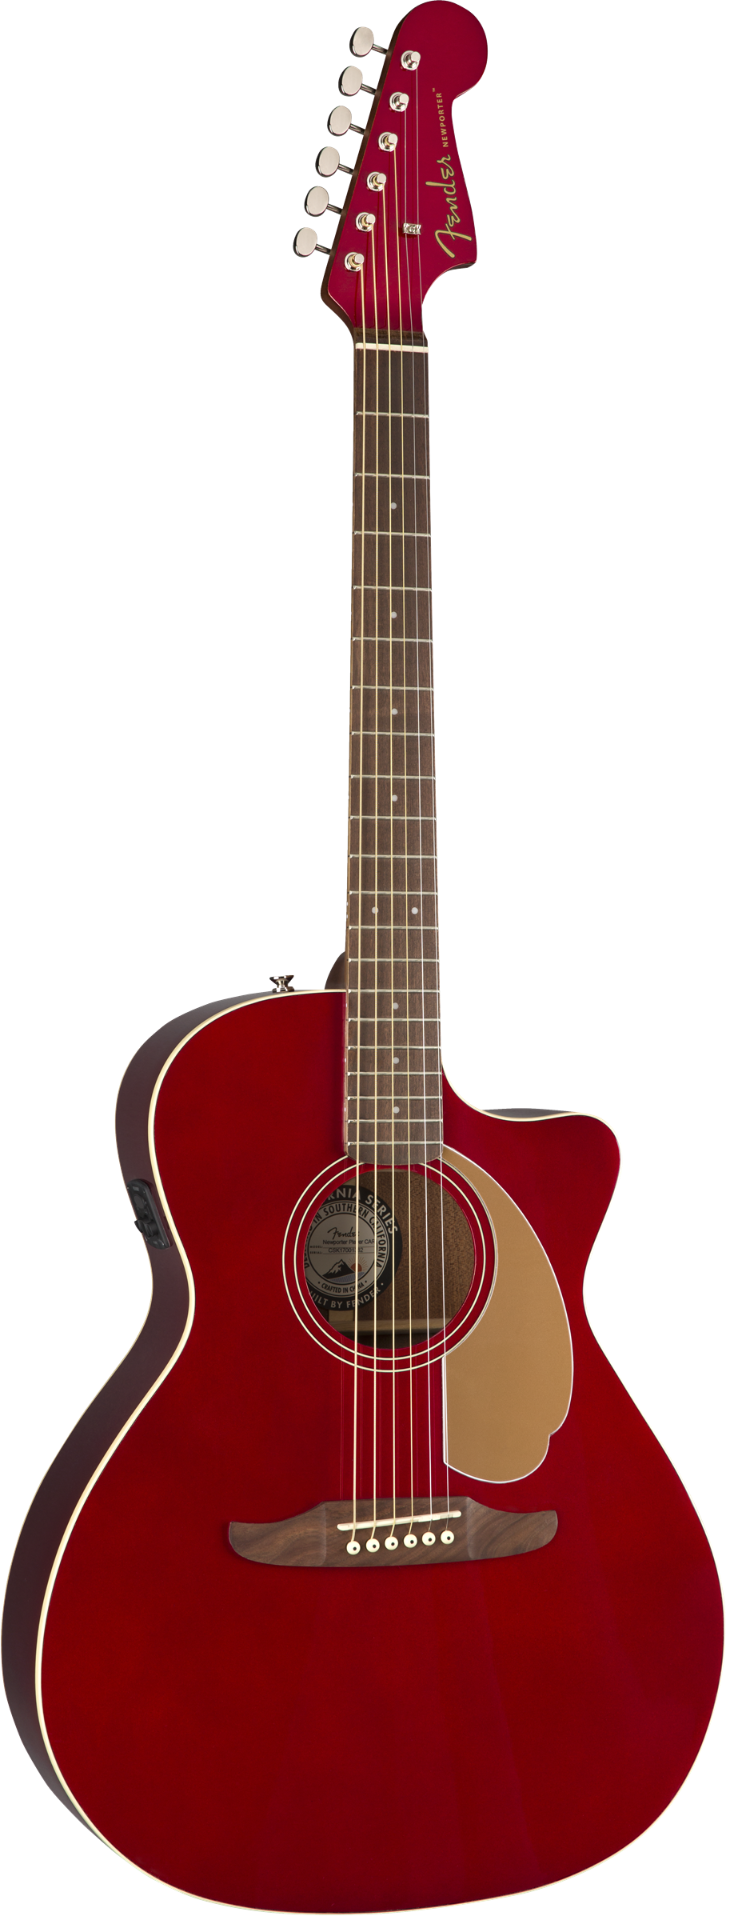 Fender Newporter Player - California Series Acoustic Guitar - Candy Apple Red